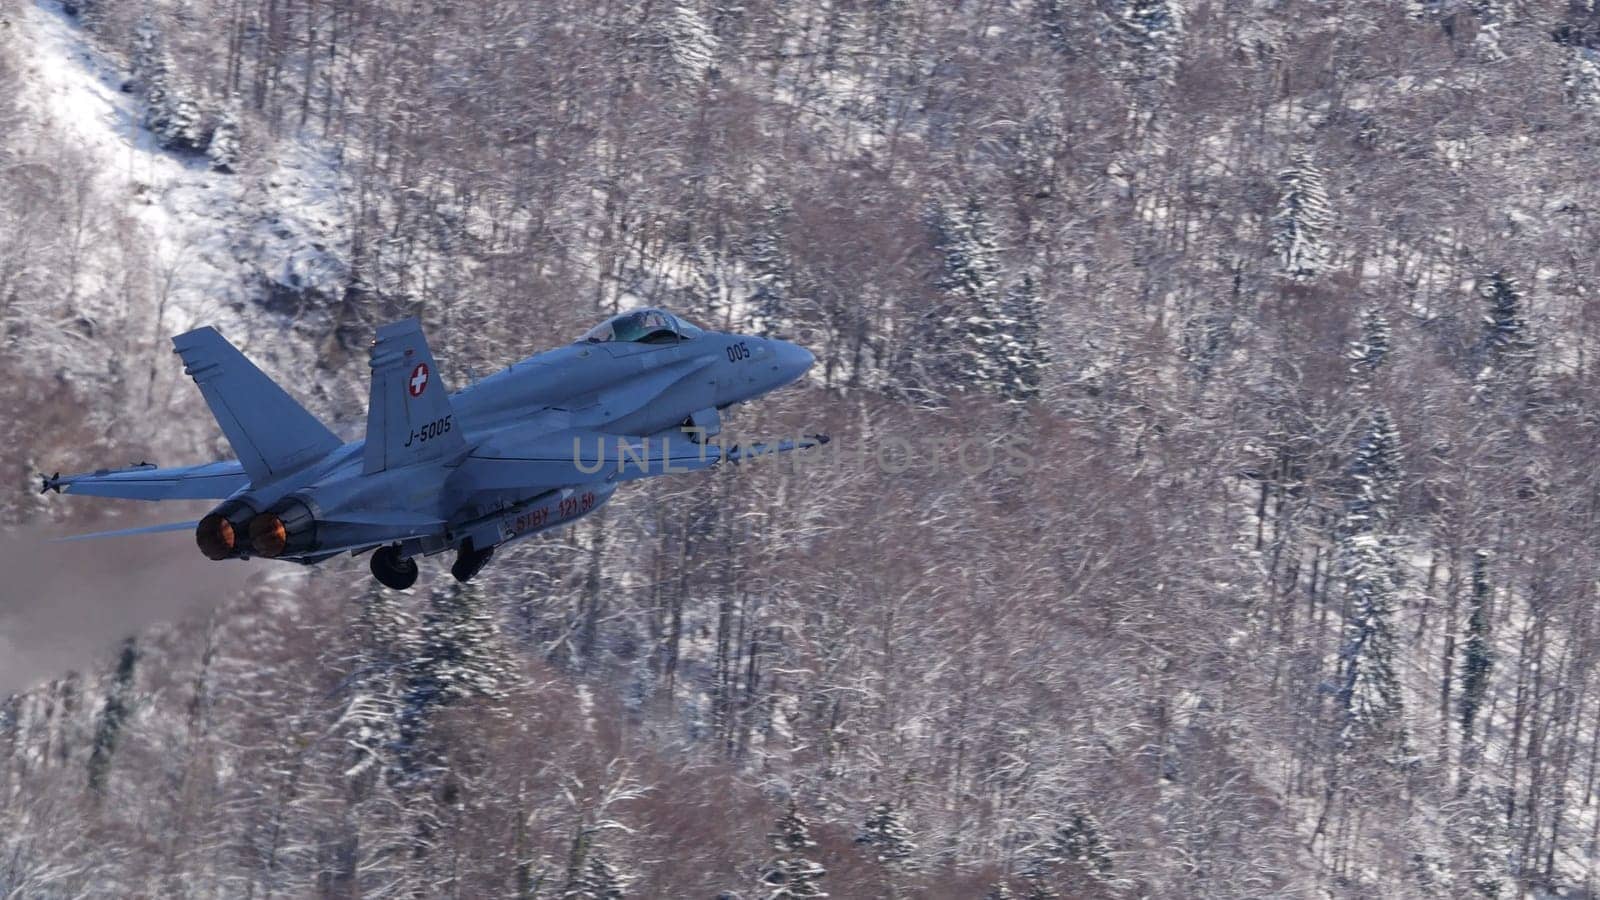 Meiringen Switzerland January 19 2023: Fighter jet ascends powerfully with its afterburners flaming against the serene backdrop of a narrow, snow-covered Alpine valley. Copy Space.